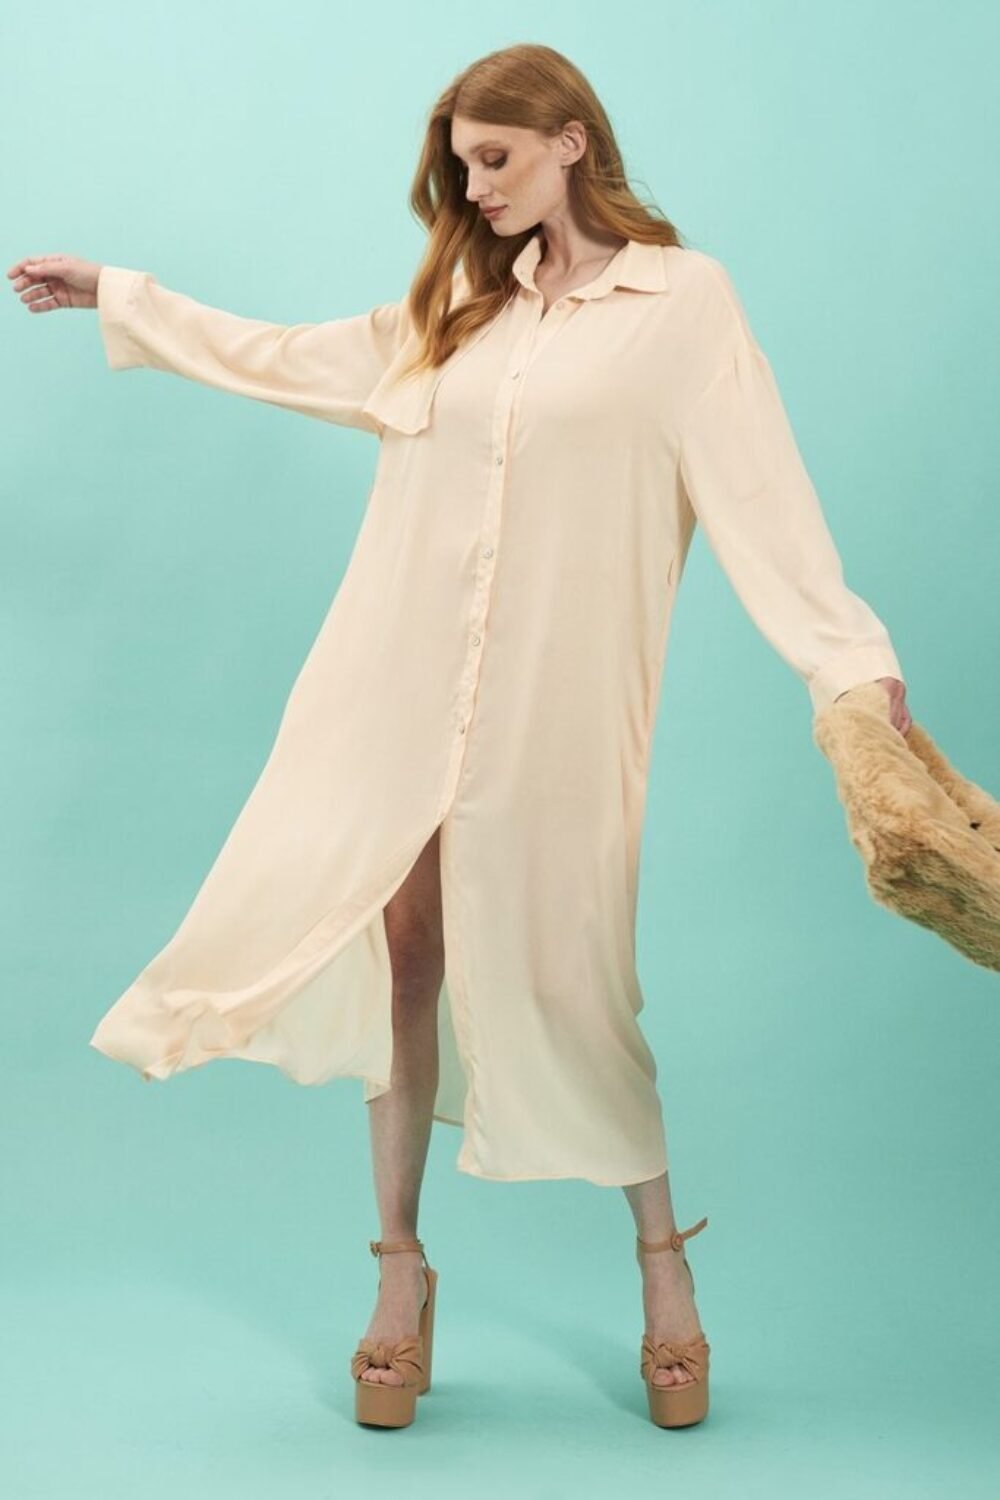 Shop Lux Cream Silk Blend Maxi Shirt Dress and women's luxury and designer clothes at www.lux-apparel.co.uk